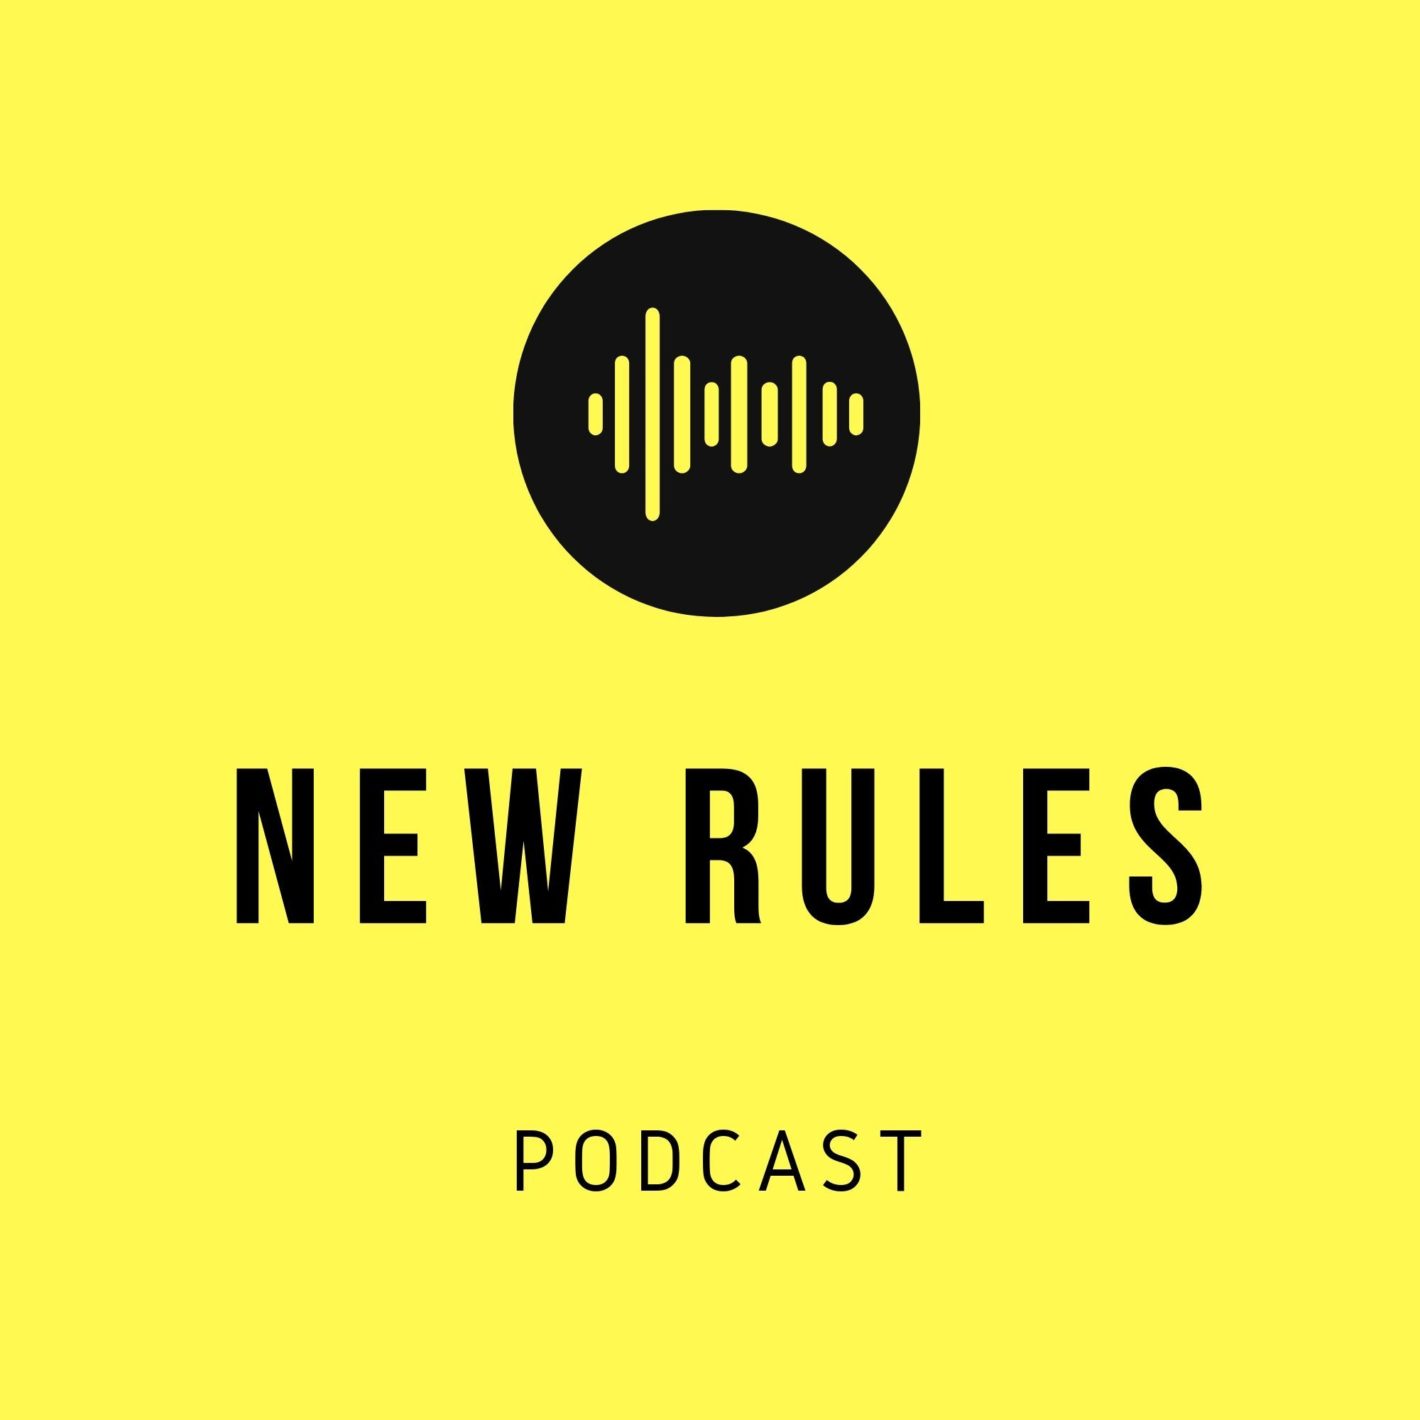 New Rules of Marketing